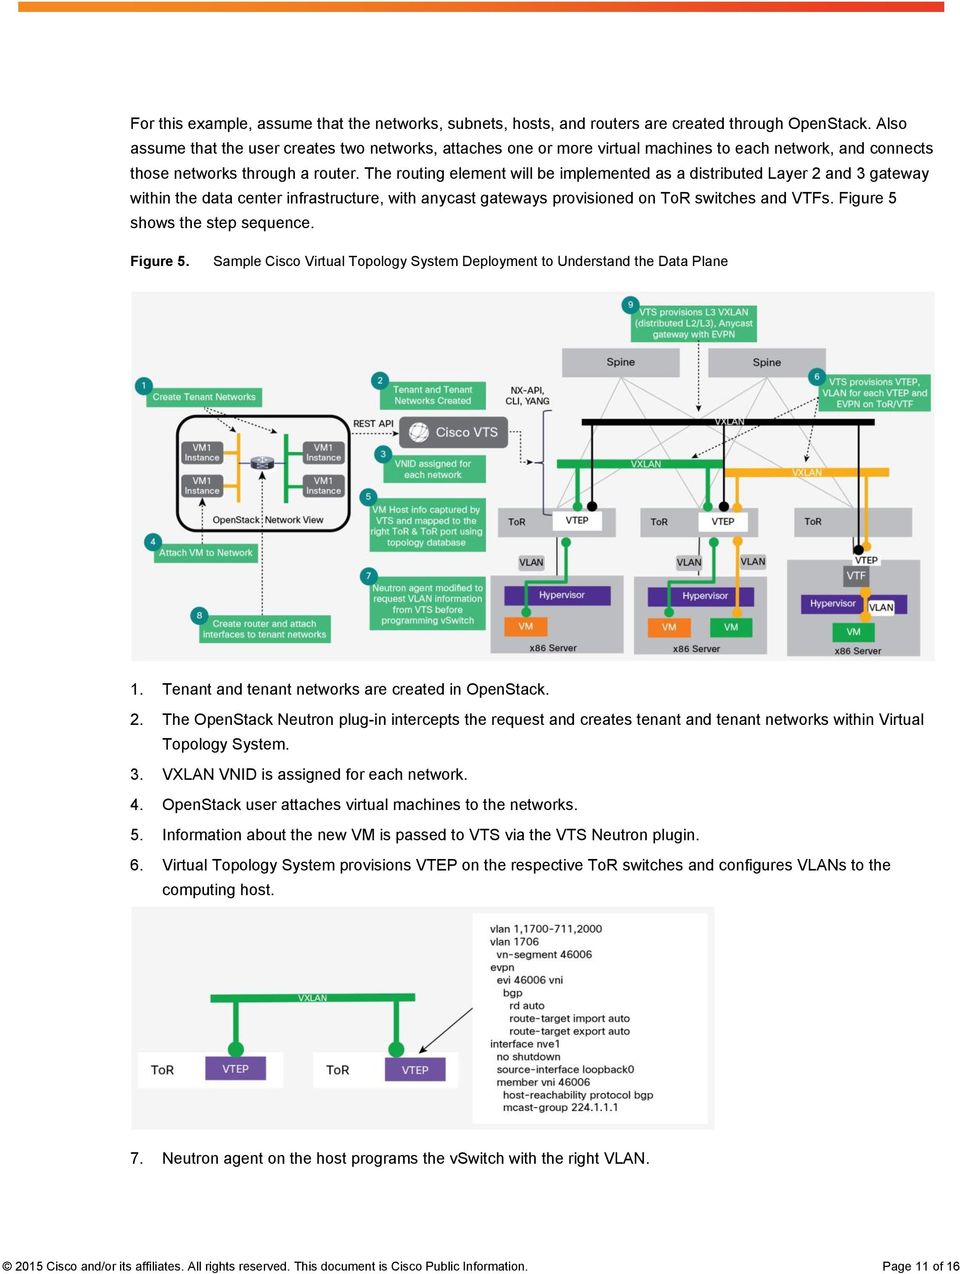 The routing element will be implemented as a distributed Layer 2 and 3 gateway within the data center infrastructure, with anycast gateways provisioned on ToR switches and VTFs.